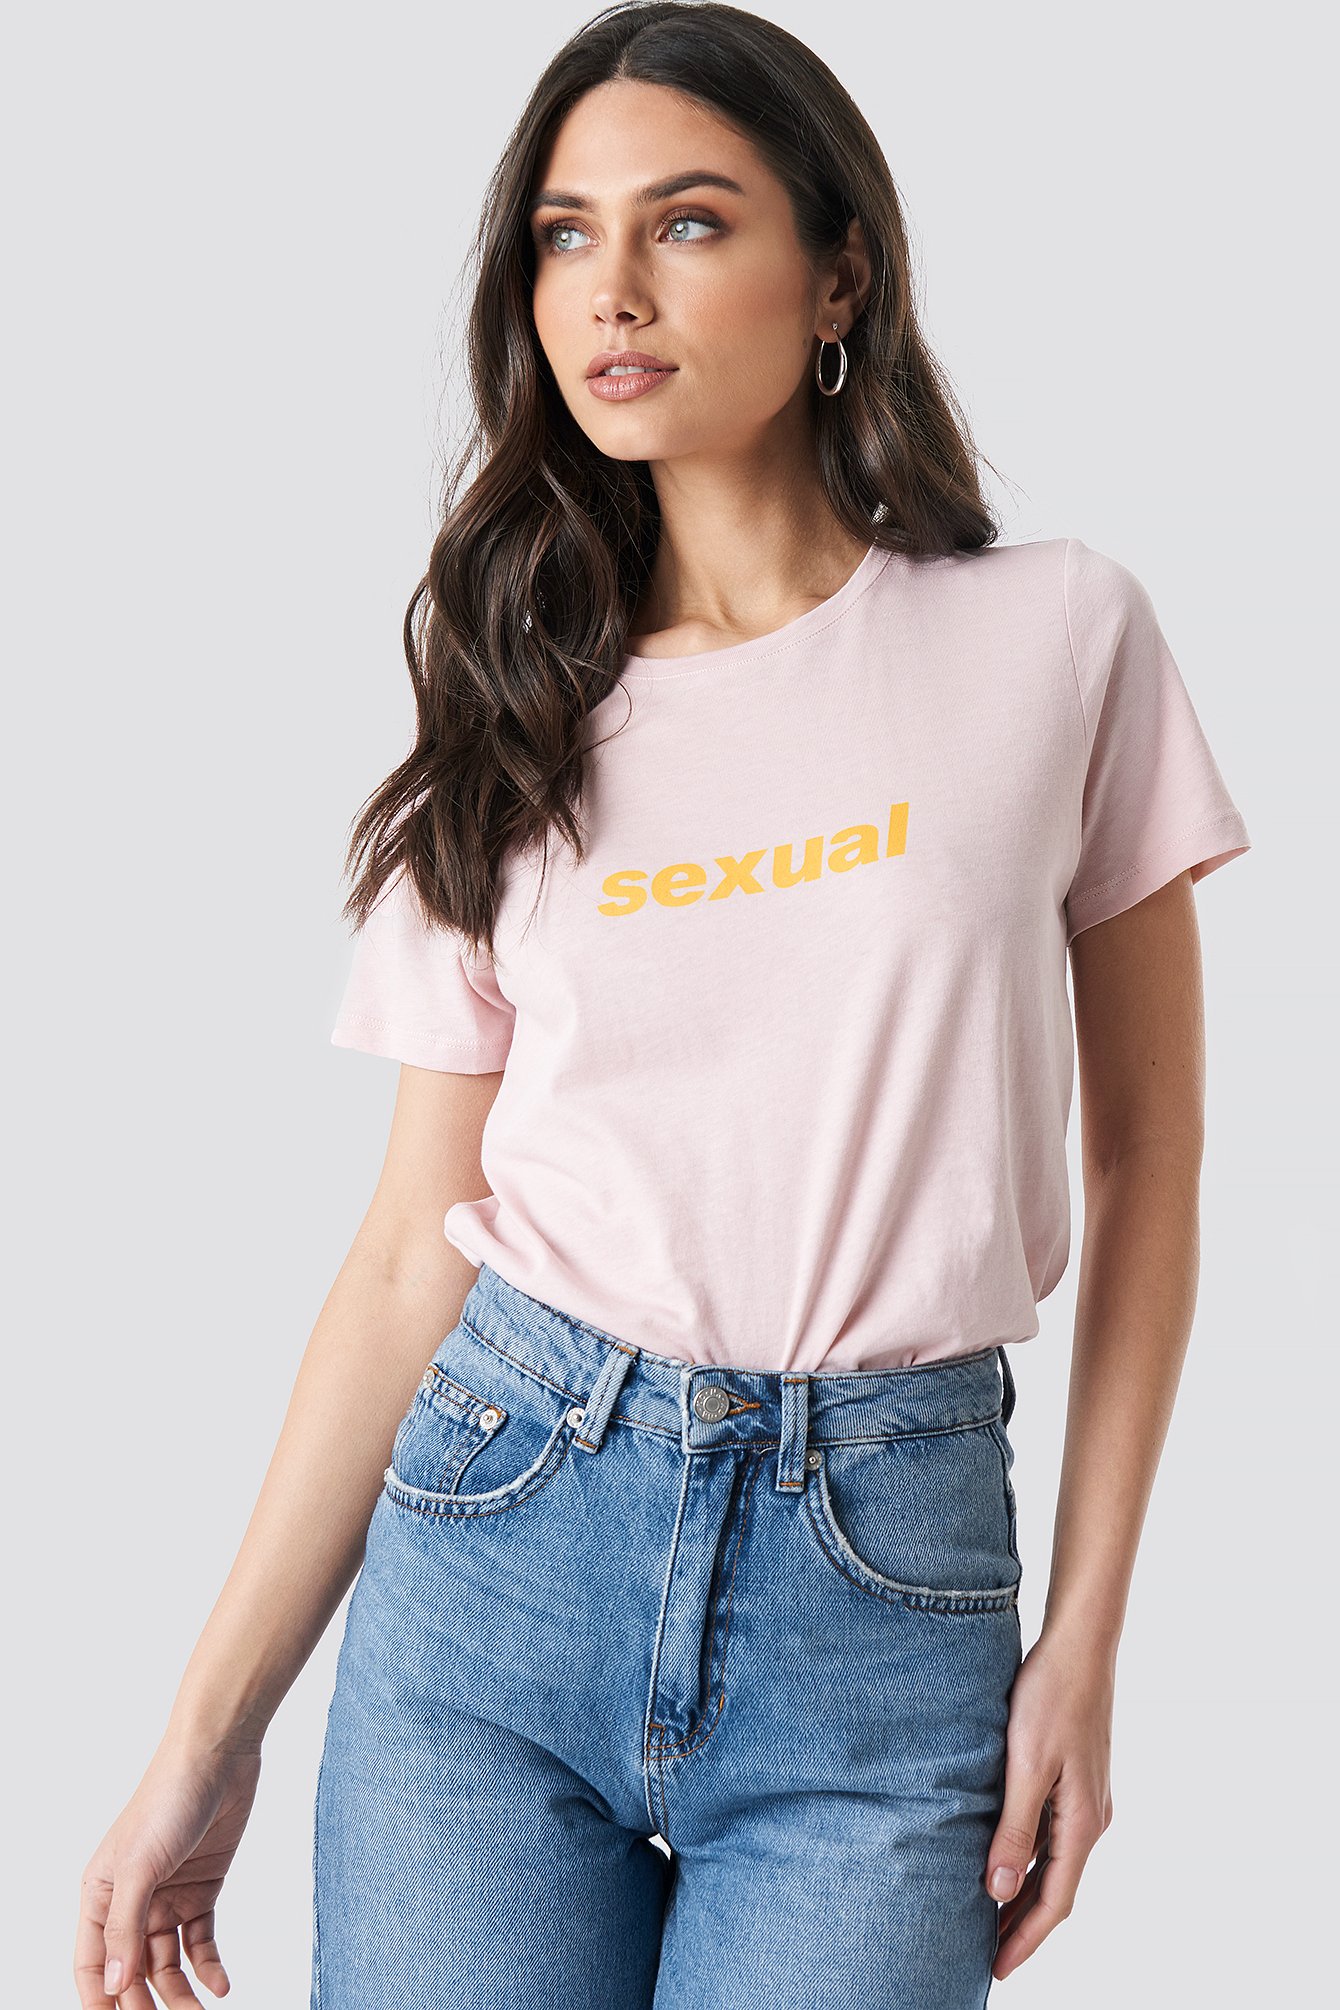 Pink Sexual Tee